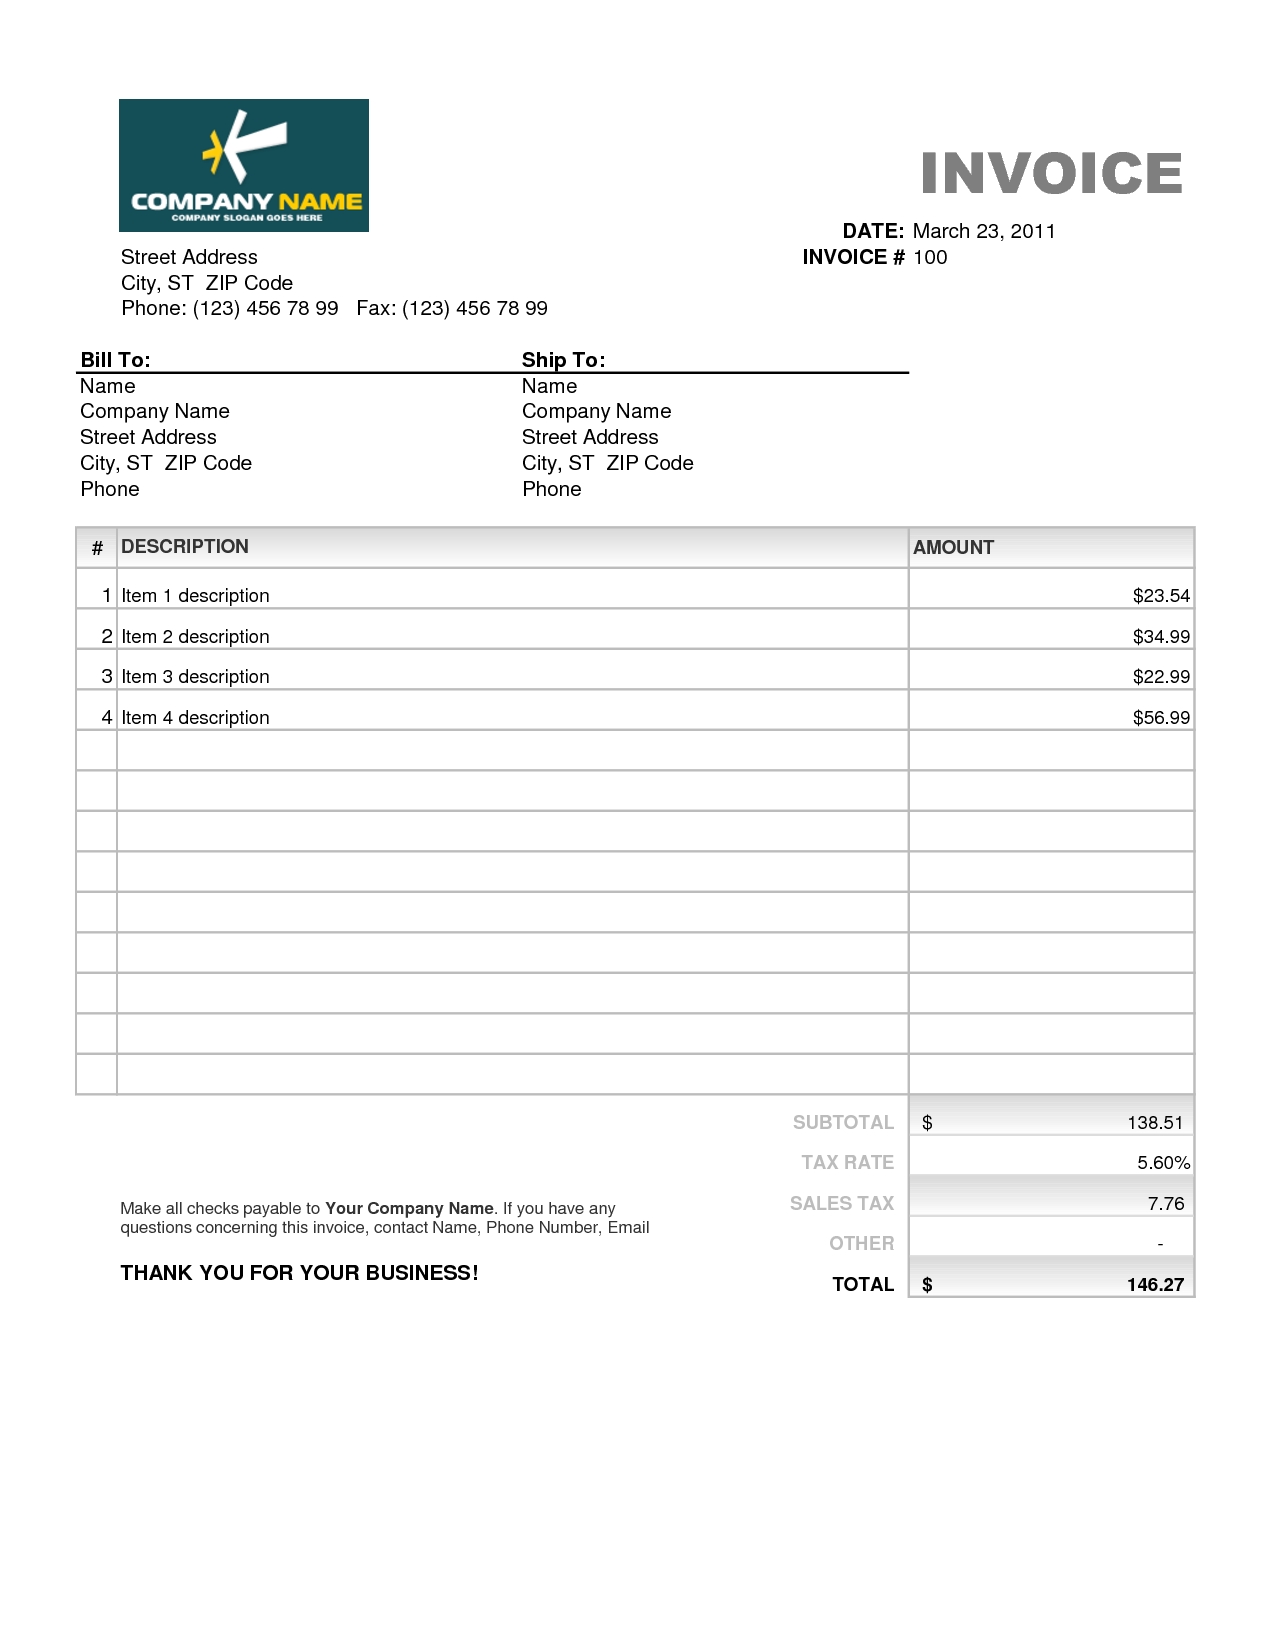 invoice template excel download free mefraltv vertex invoice template